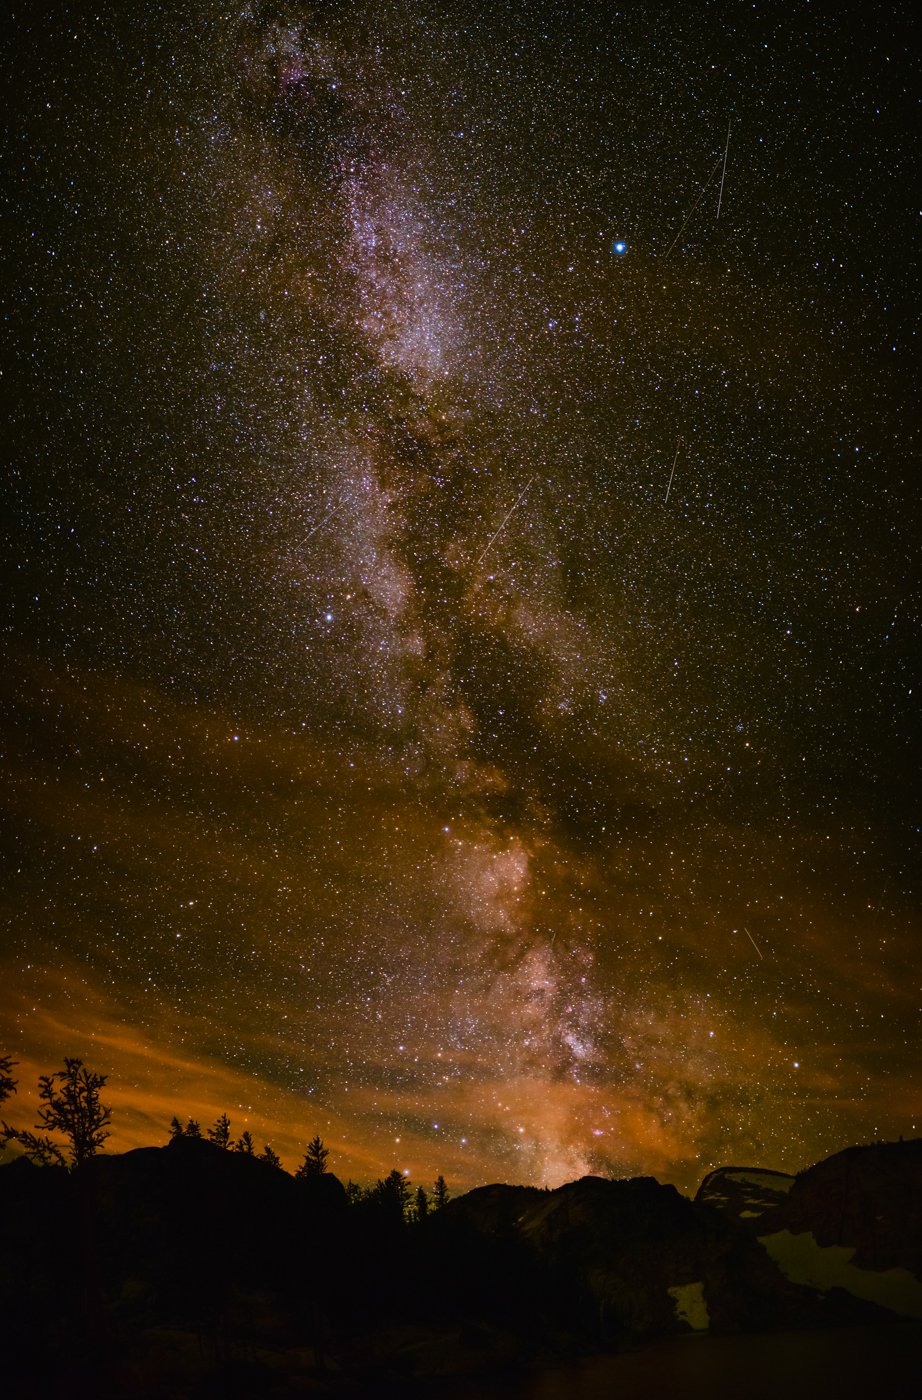 Milky Way Photography Dos and Dont's